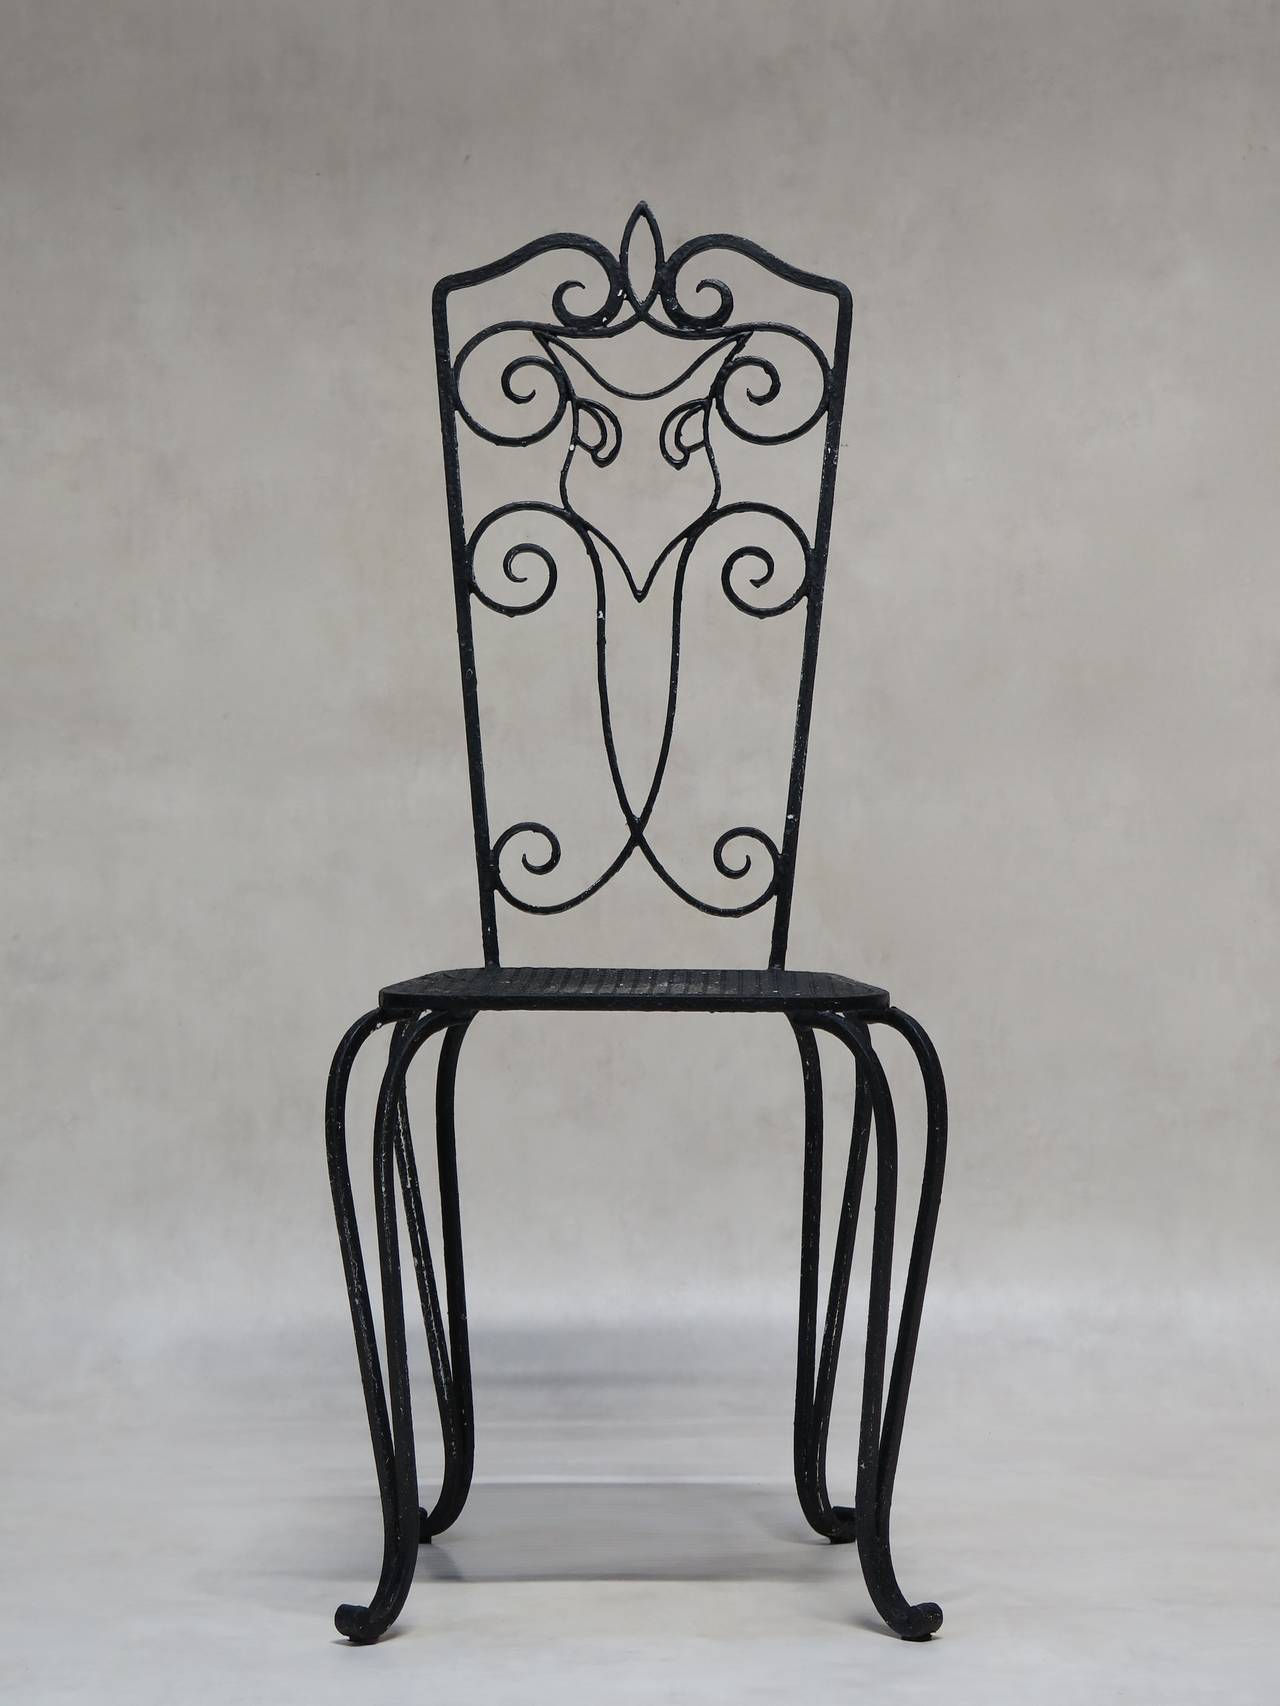 French wrought-iron outdoor dining set comprised of a rectangular table and four chairs.

The table is comfortably large, with a cloverleaf-patterned sheet metal top, raised on cabriole legs with scrolled feet, and a twisted iron X-shape